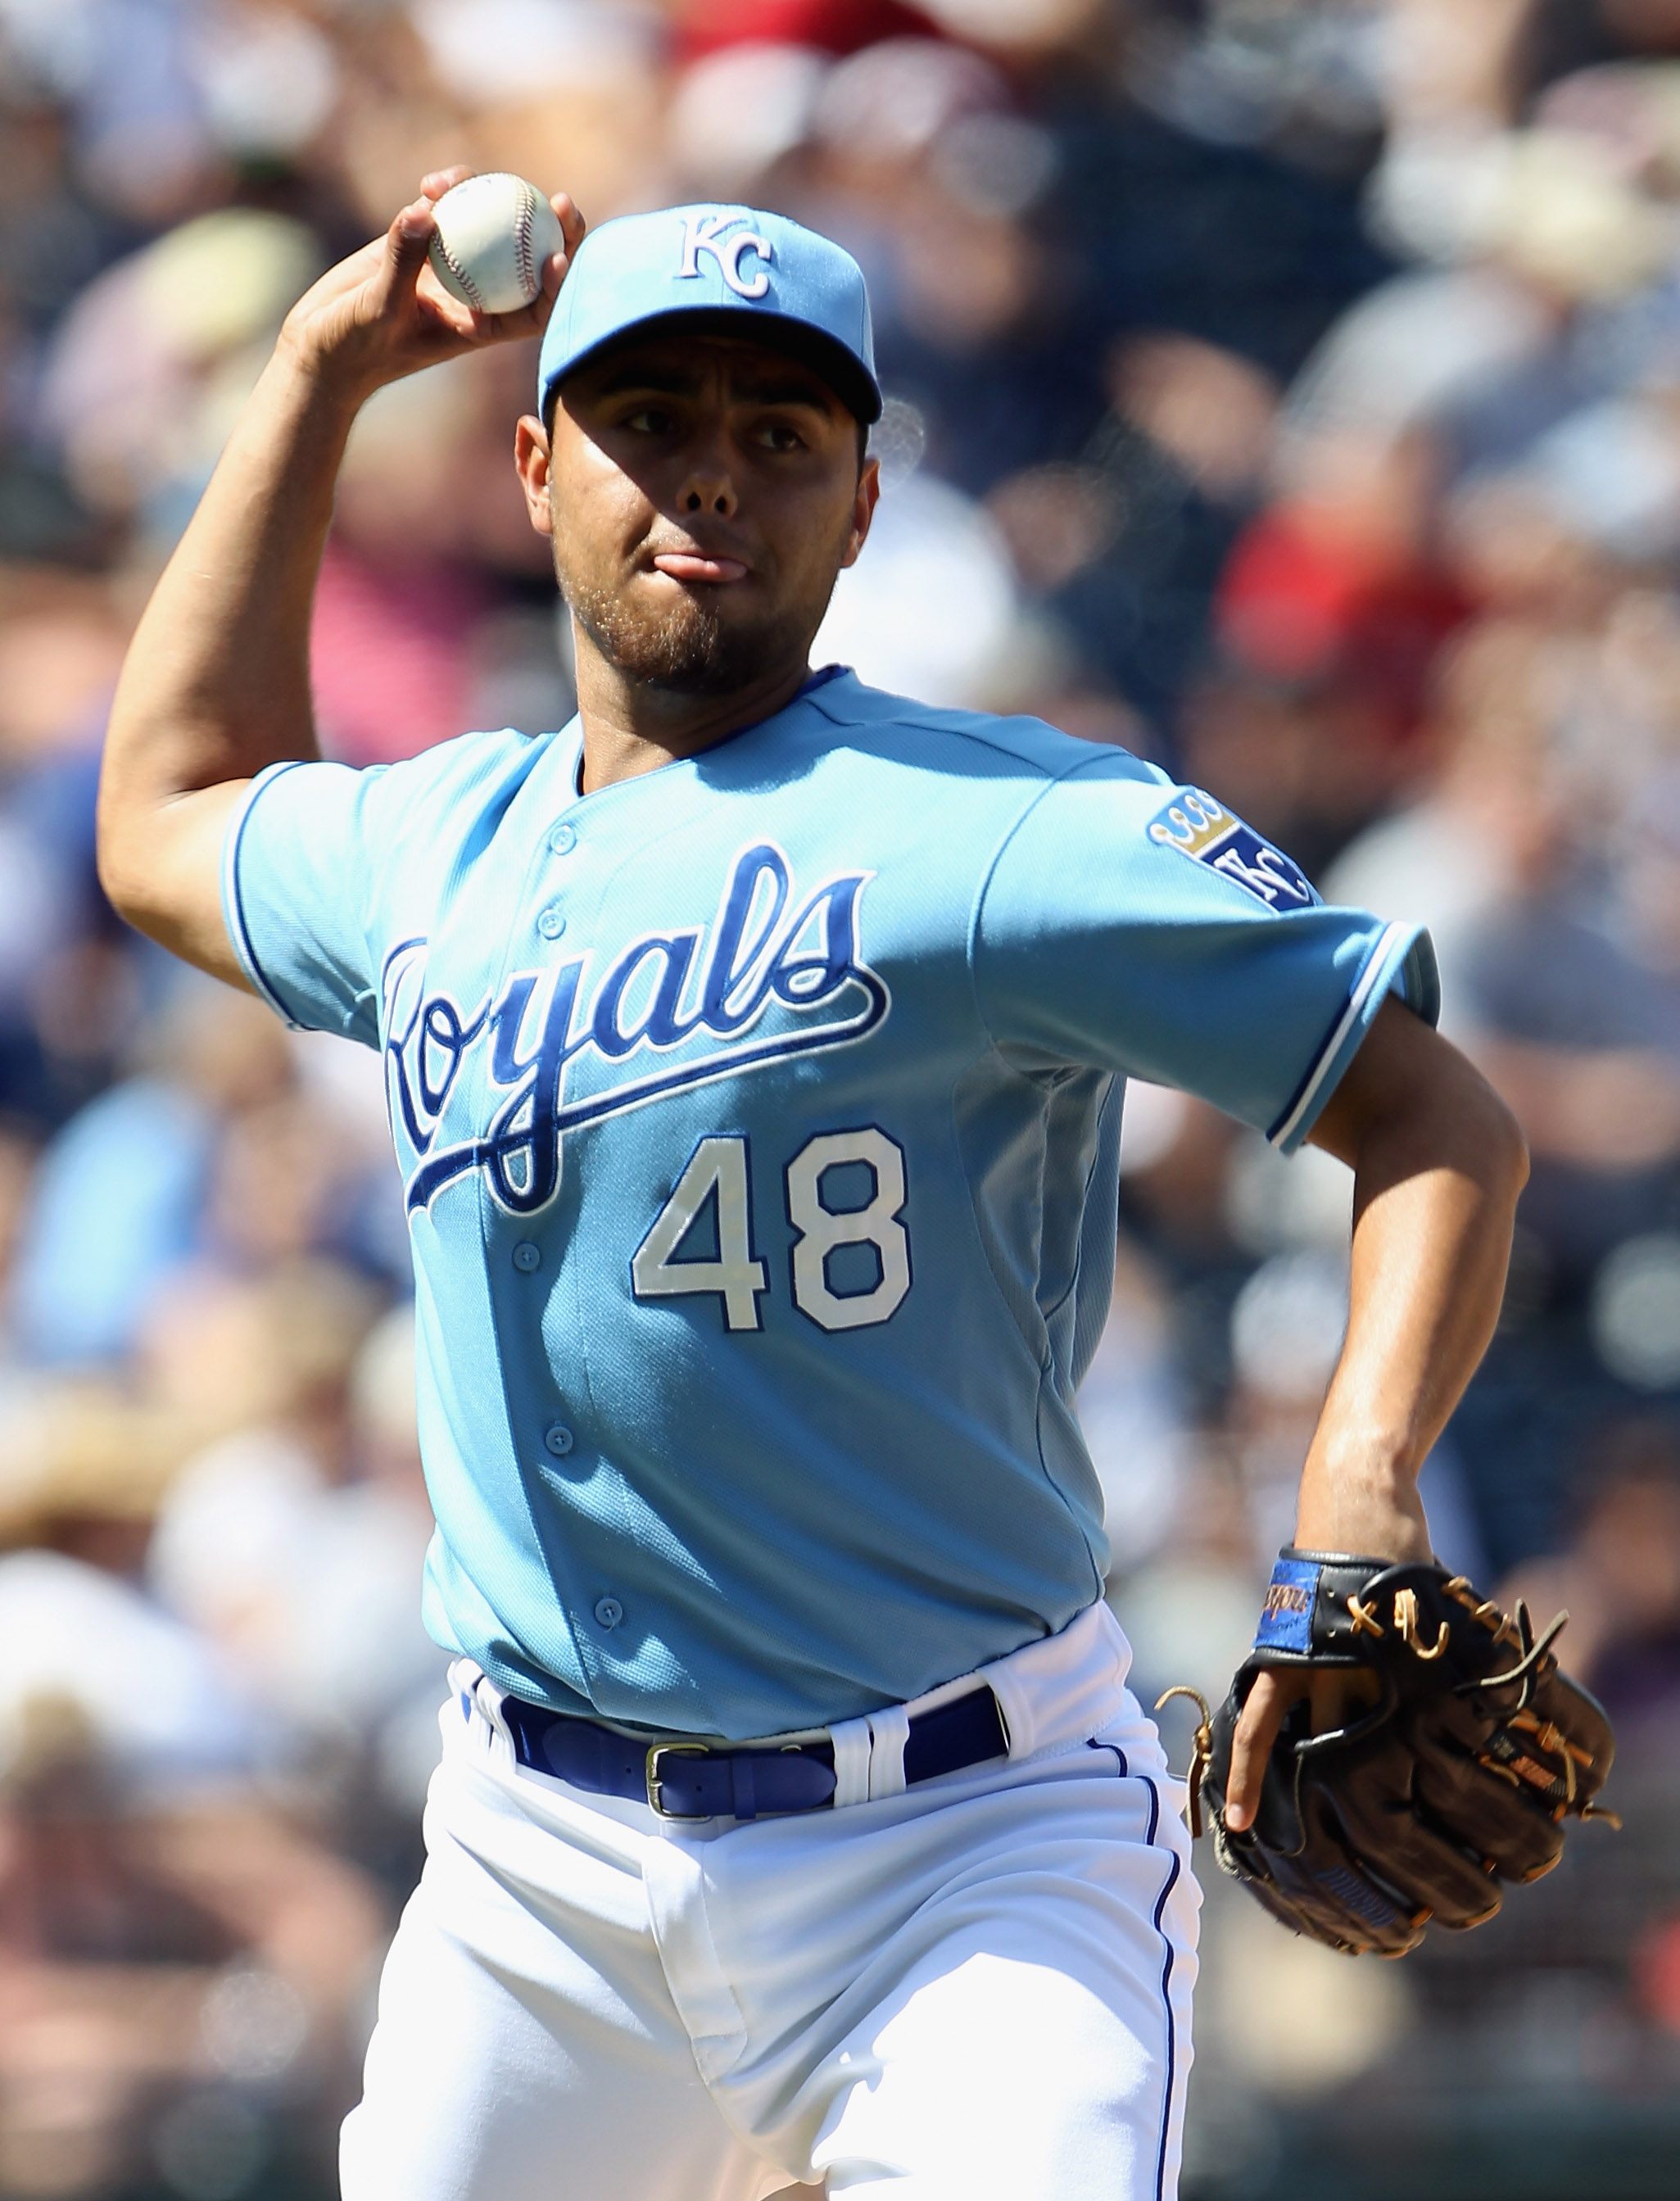 KANSAS CITY, MO - AUGUST 15:  Pitcher Joakim Soria #48 of the Kansas City Royals throws toward first during the game against the New York Yankees on August 15, 2010 at Kauffman stadium in Kansas City, Missouri.  (Photo by Jamie Squire/Getty Images)